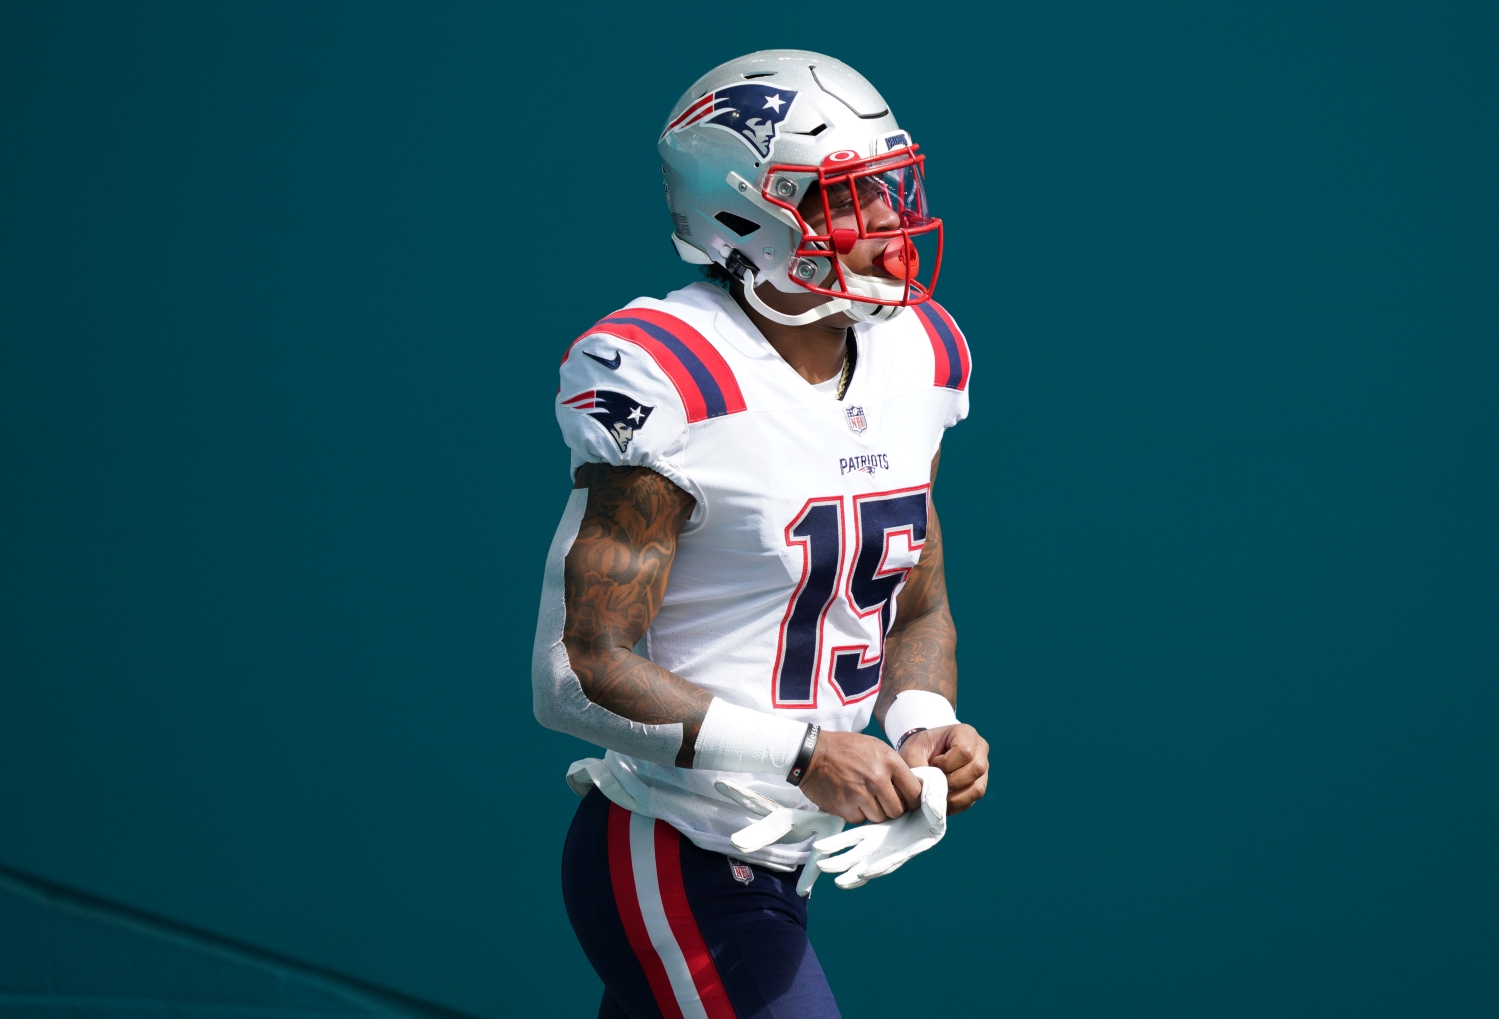 New England Patriots wide receiver N'Keal Harry prepares to take the field against the Miami Dolphins.